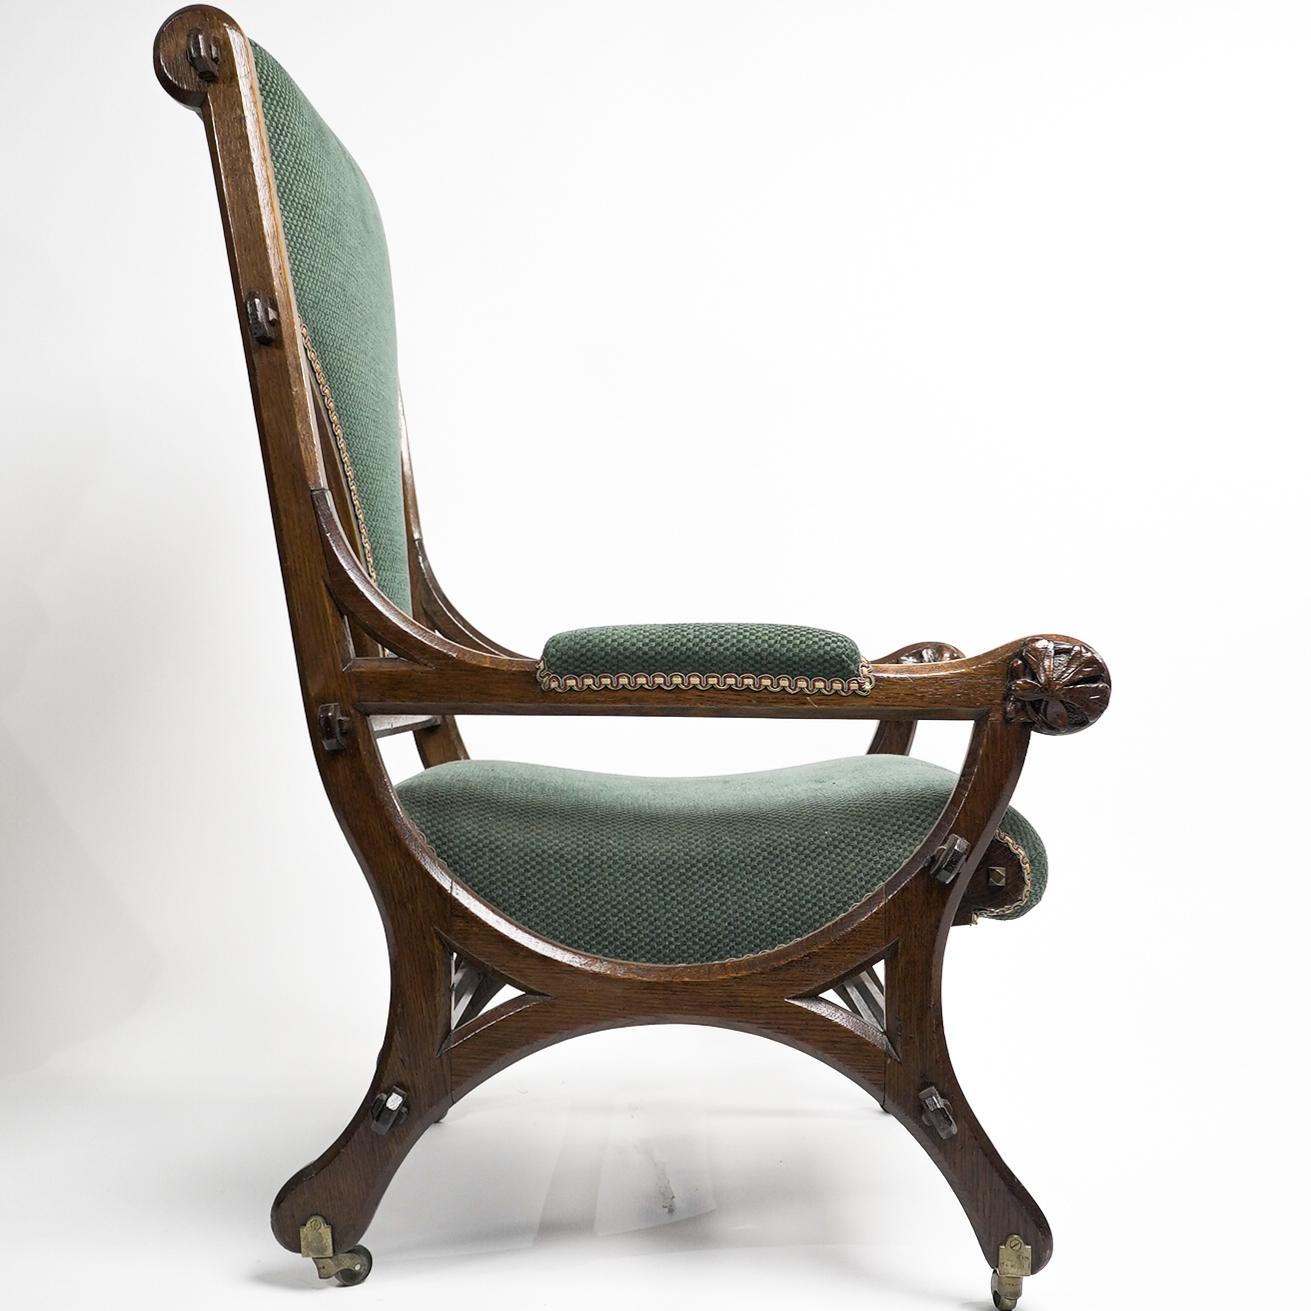 John Pollard Seddon Gothic Revival oak armchair with through pegged tenon joints In Good Condition For Sale In London, GB